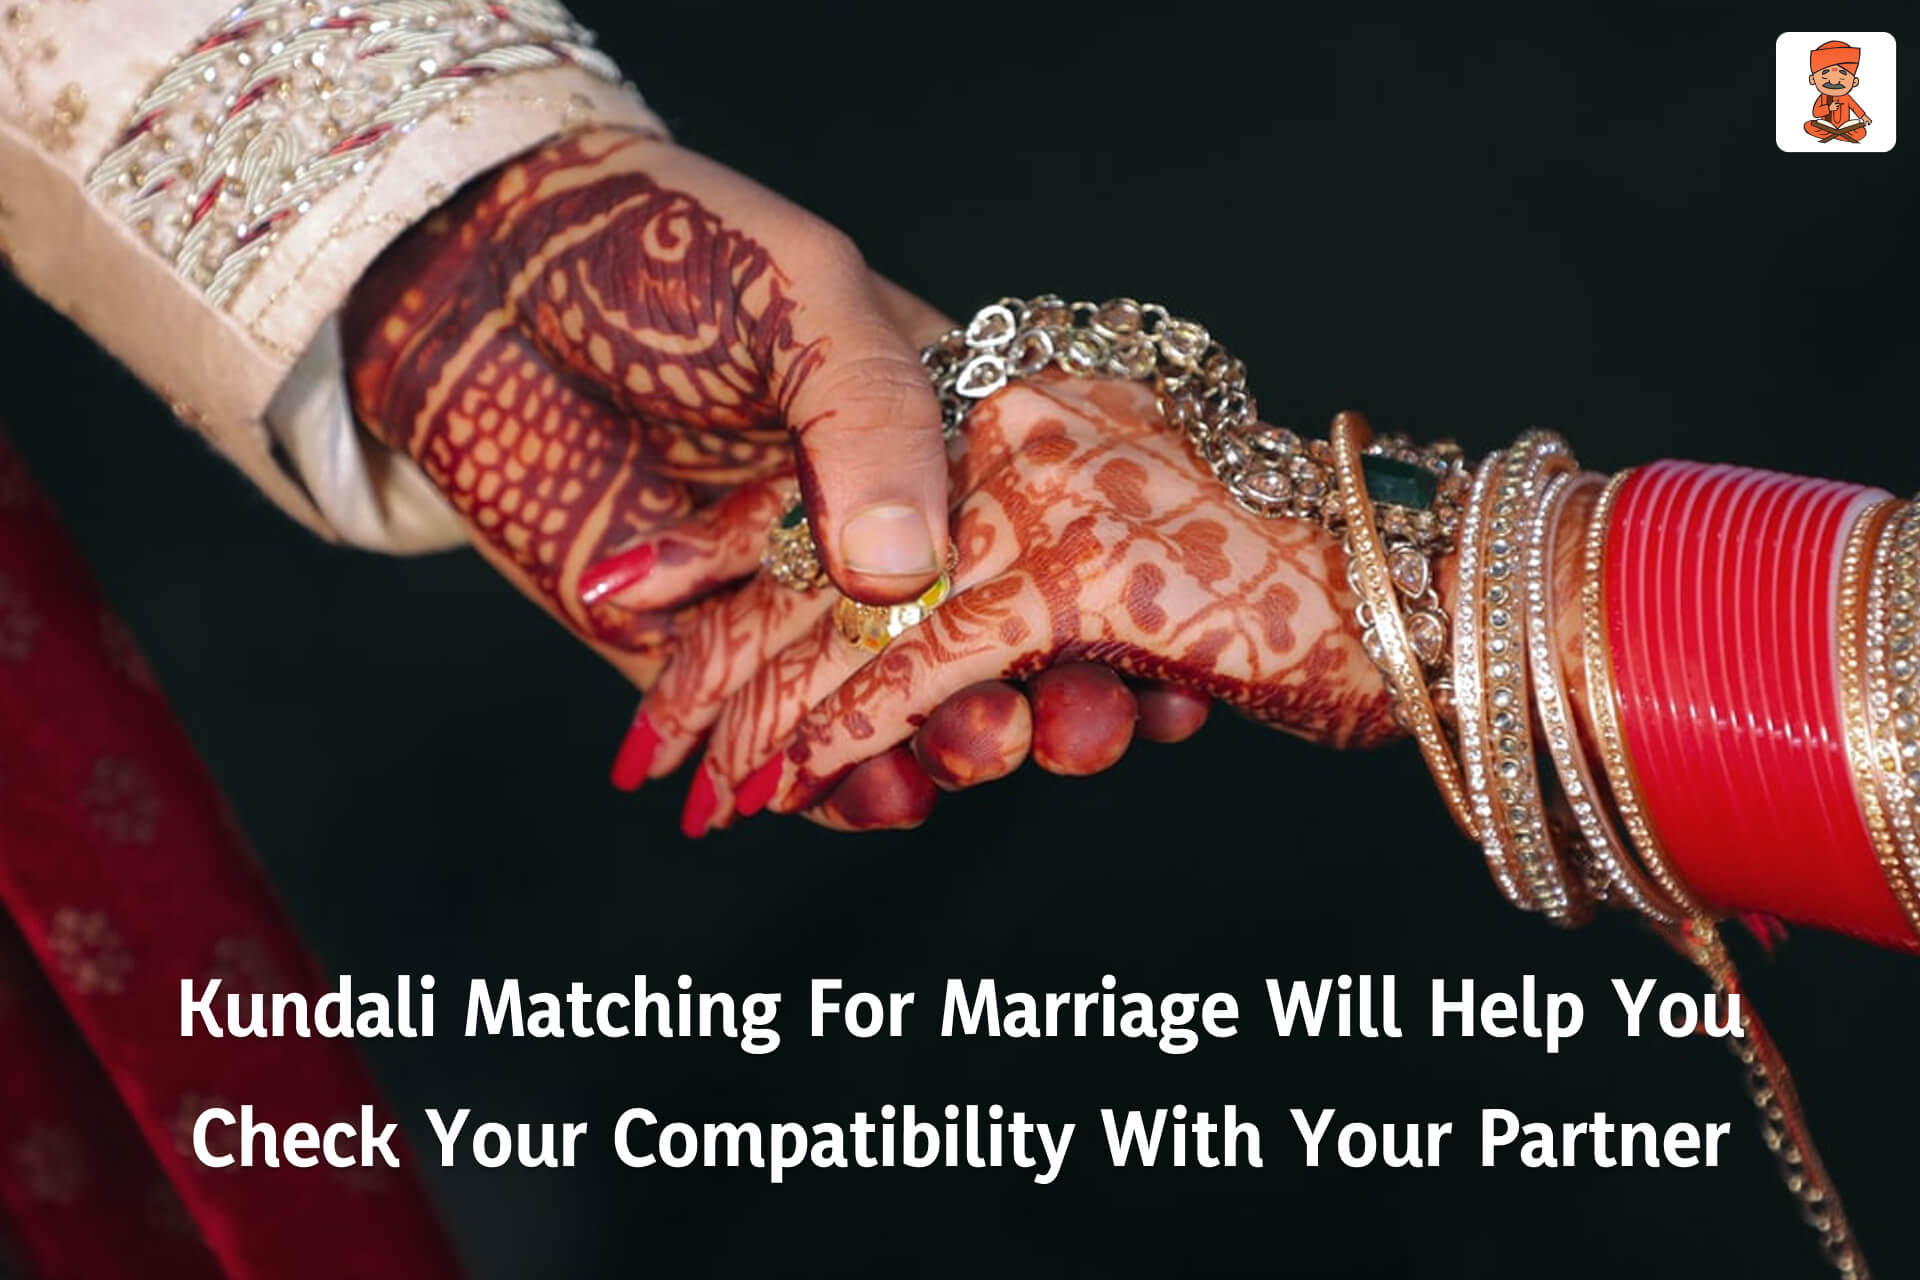 Kundali Matching For Marriage Will Help You Find Perfect Partner